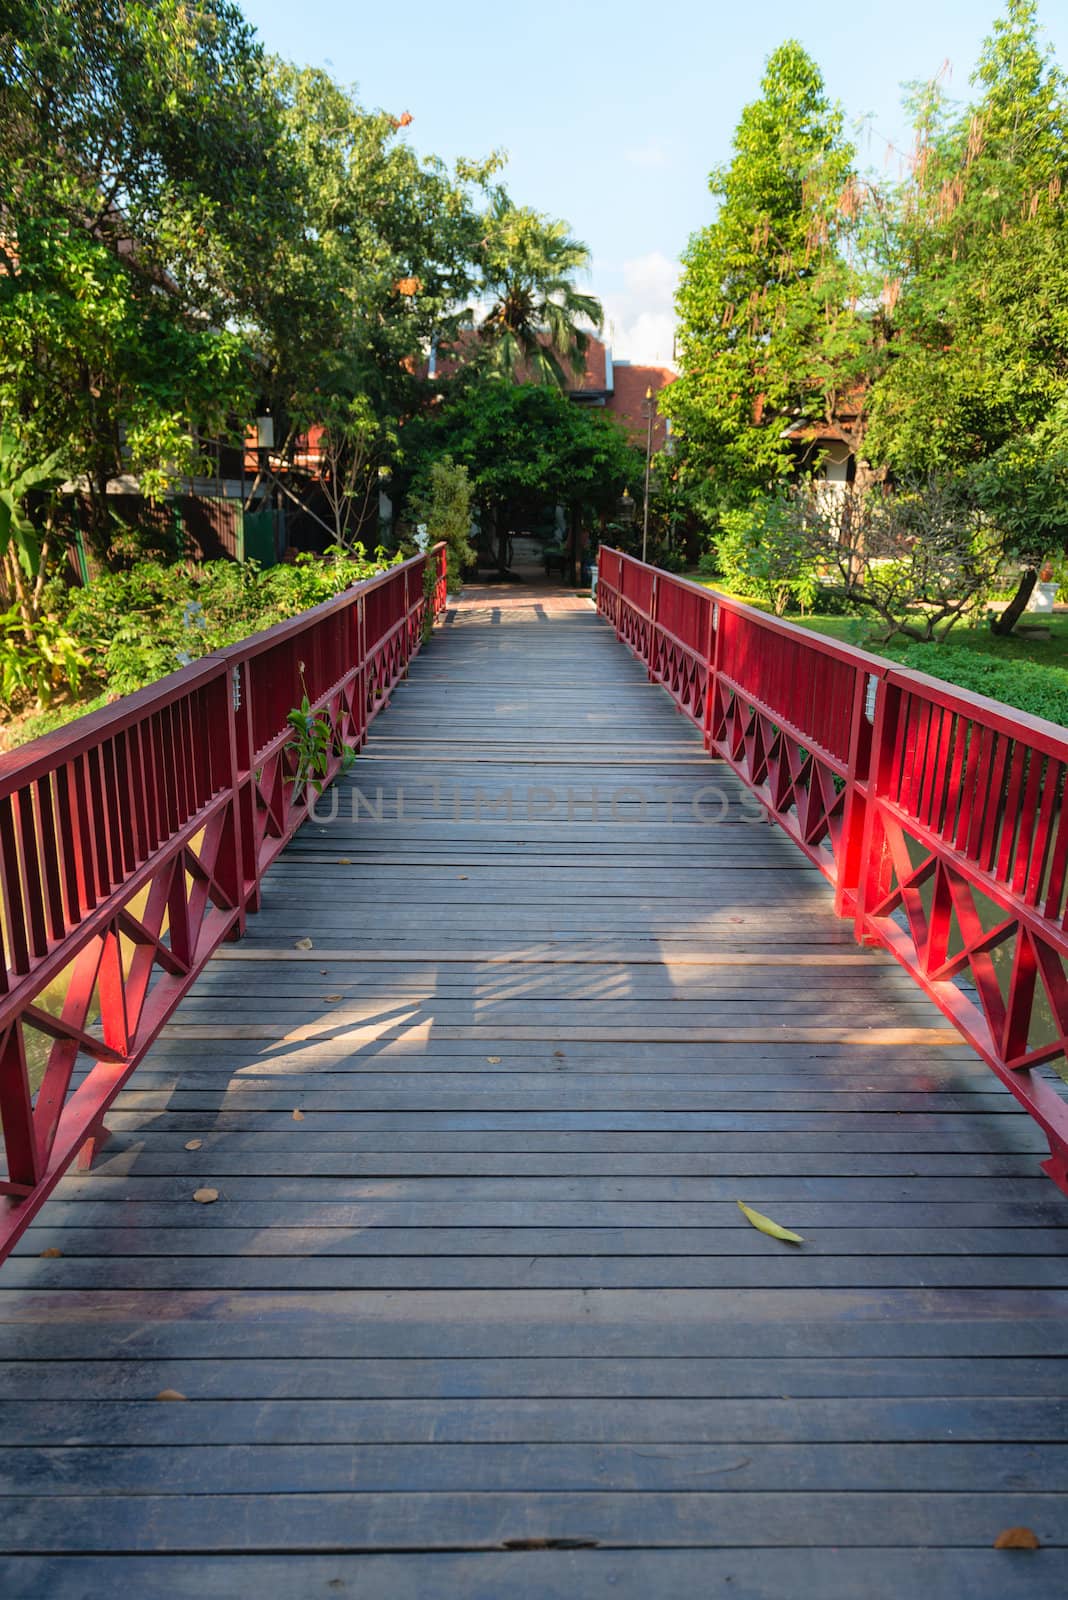 Wooden bridge with red fence  in green tropical park 